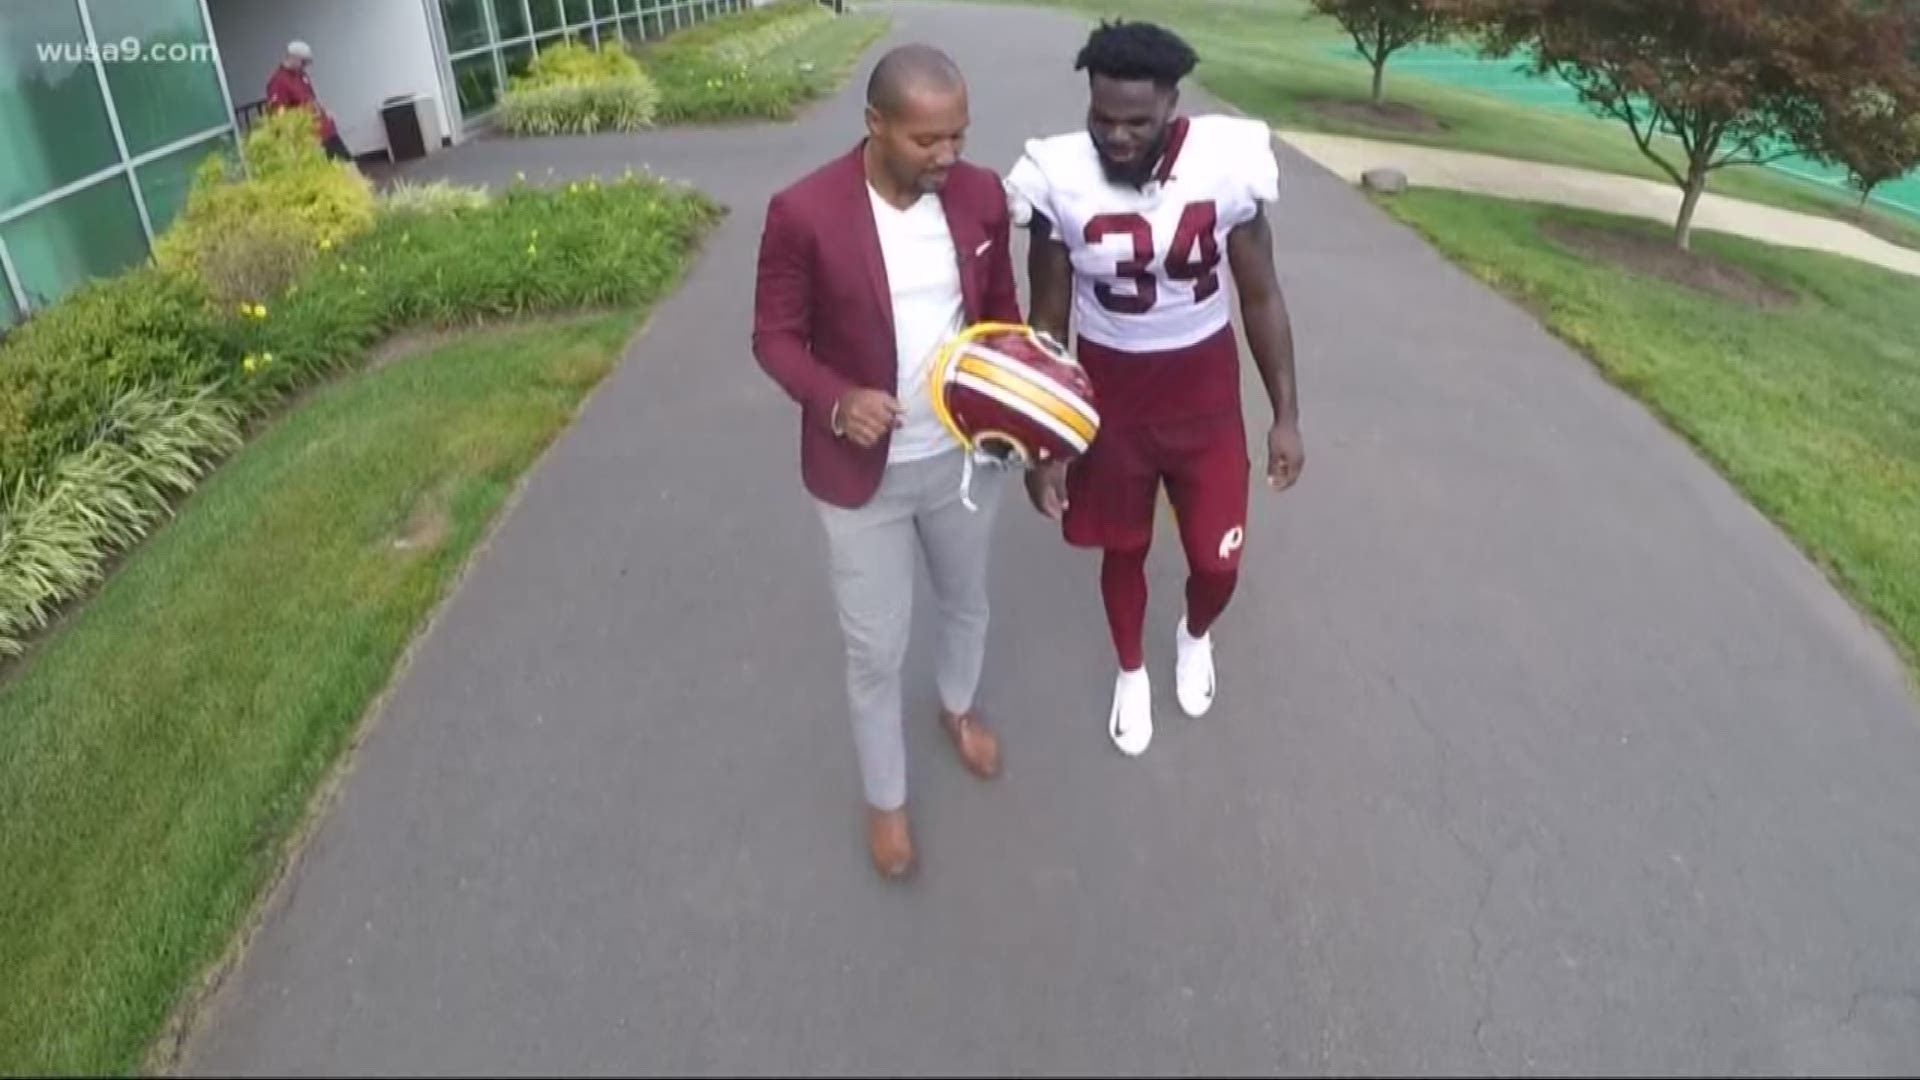 Redskins running back Wendell Smallwood gets ready to face his former team, 8 days after the Eagles released him.